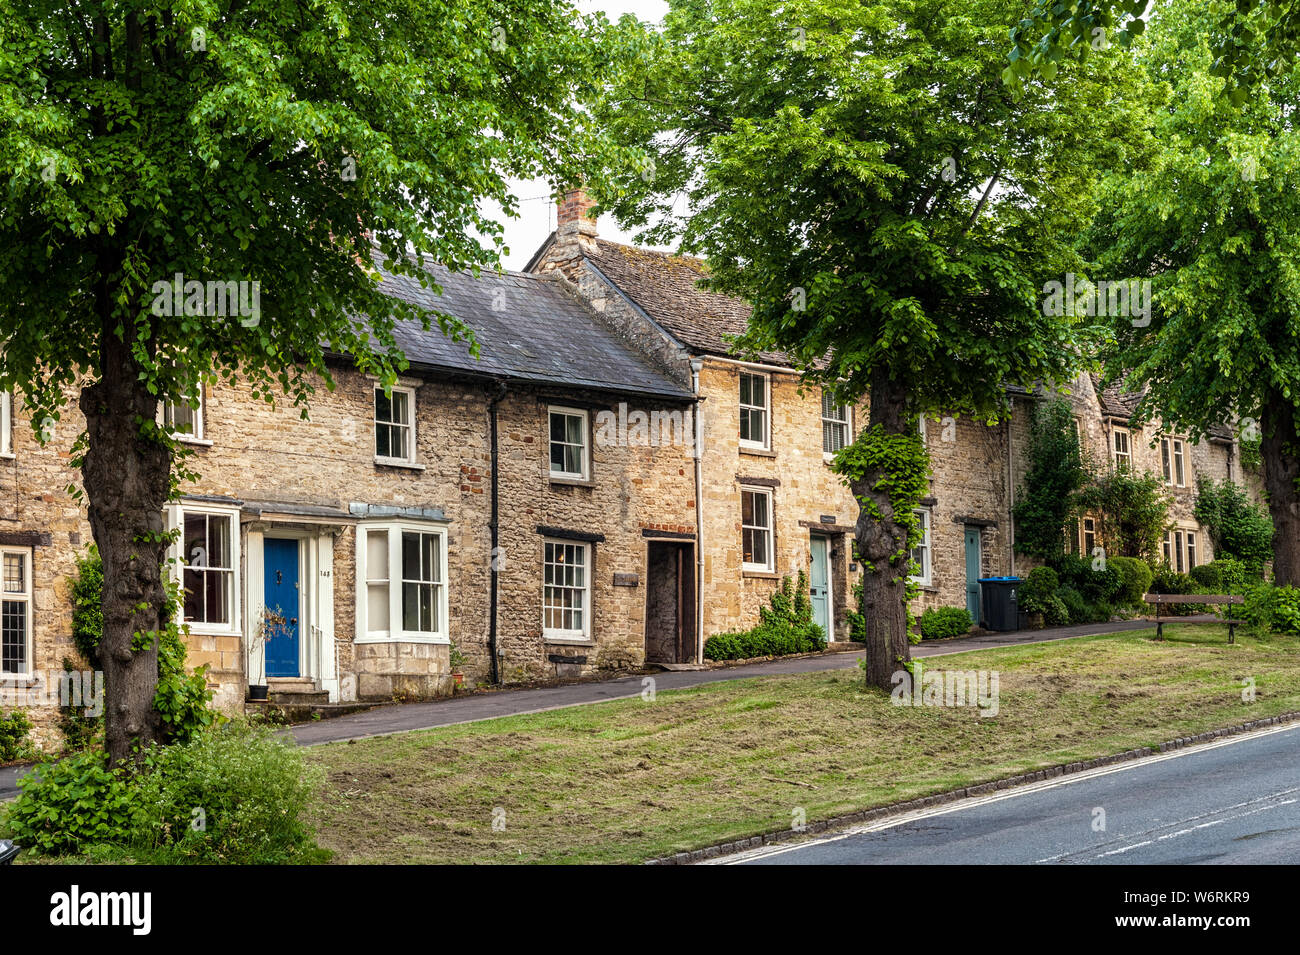 Quaint Cotswold Romantic Stone Cottages On The Hill In The Lovely